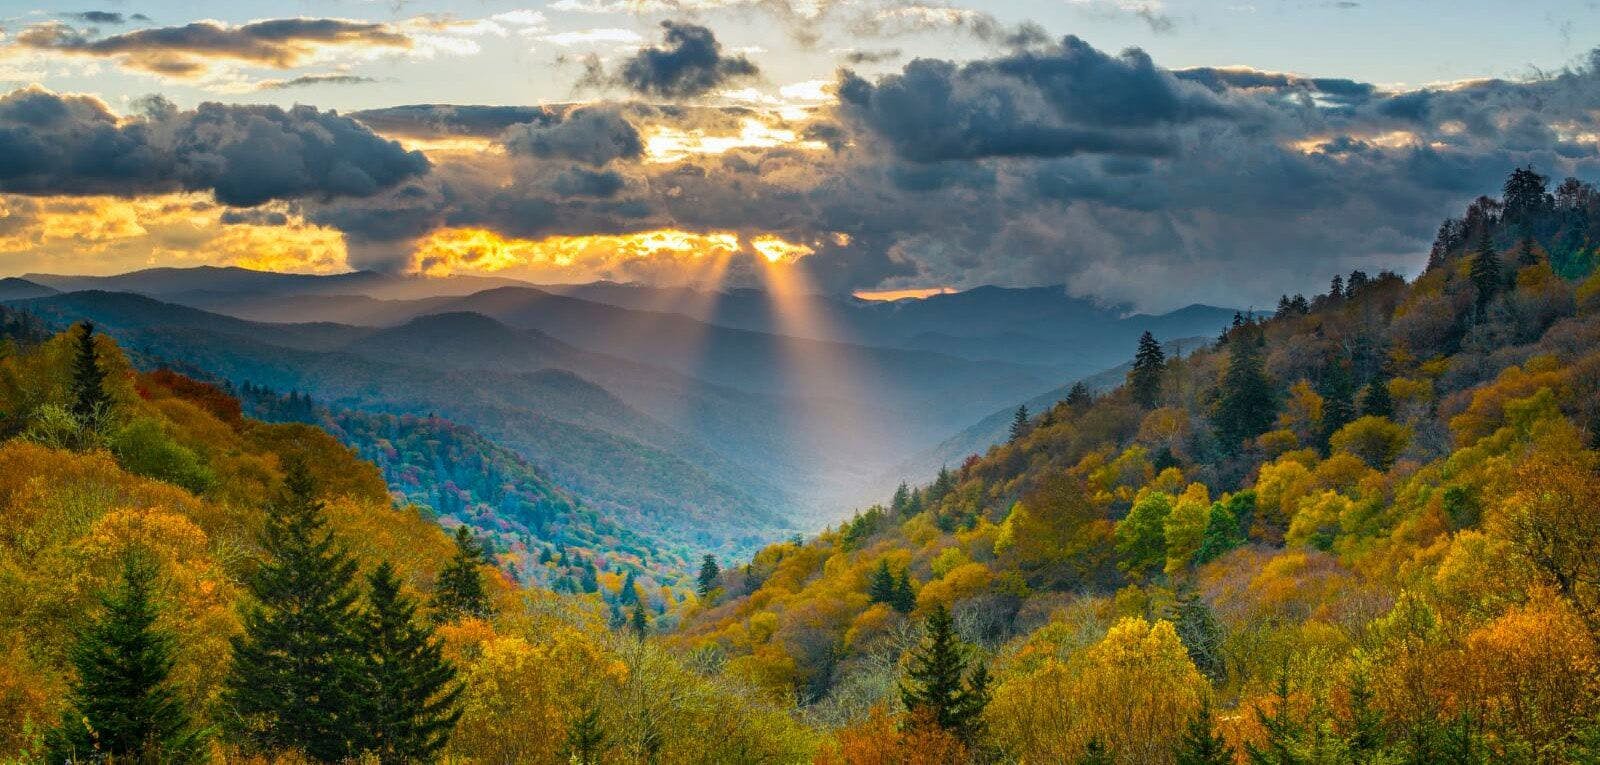 Smoky Mountains view at sunset